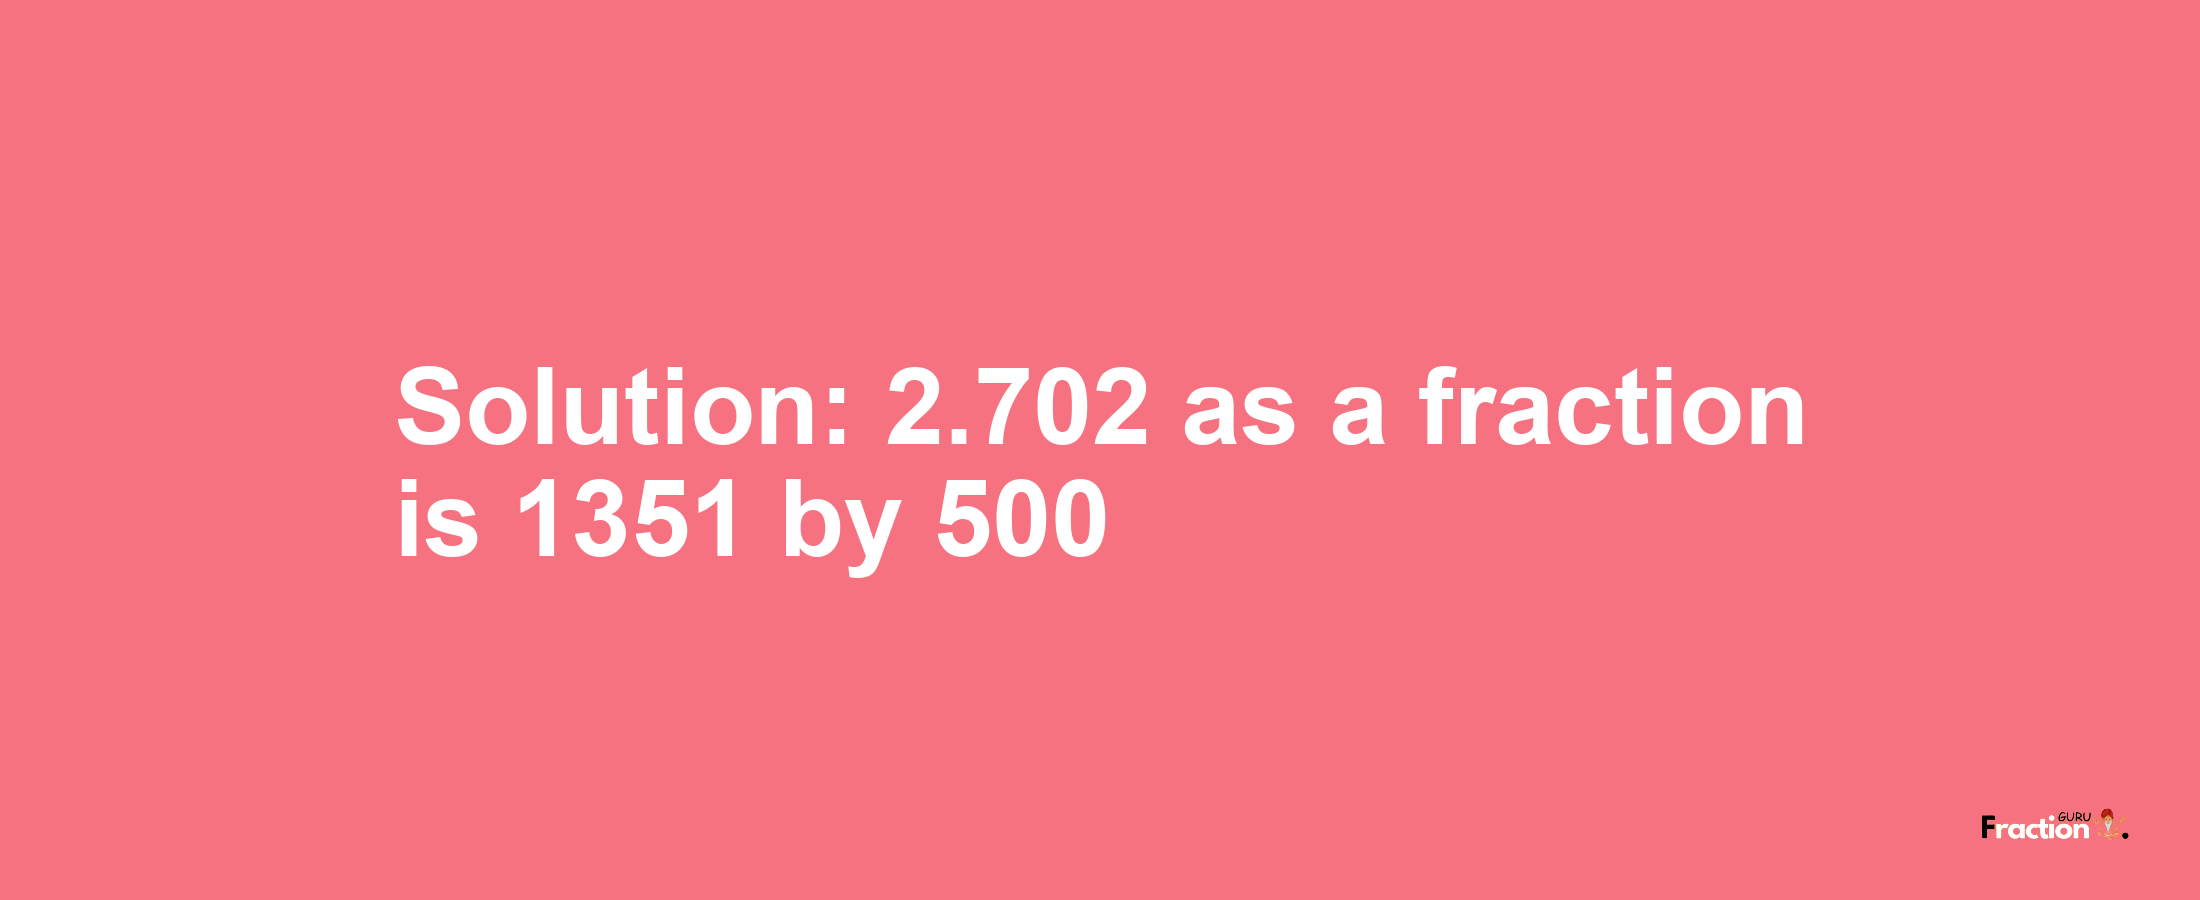 Solution:2.702 as a fraction is 1351/500